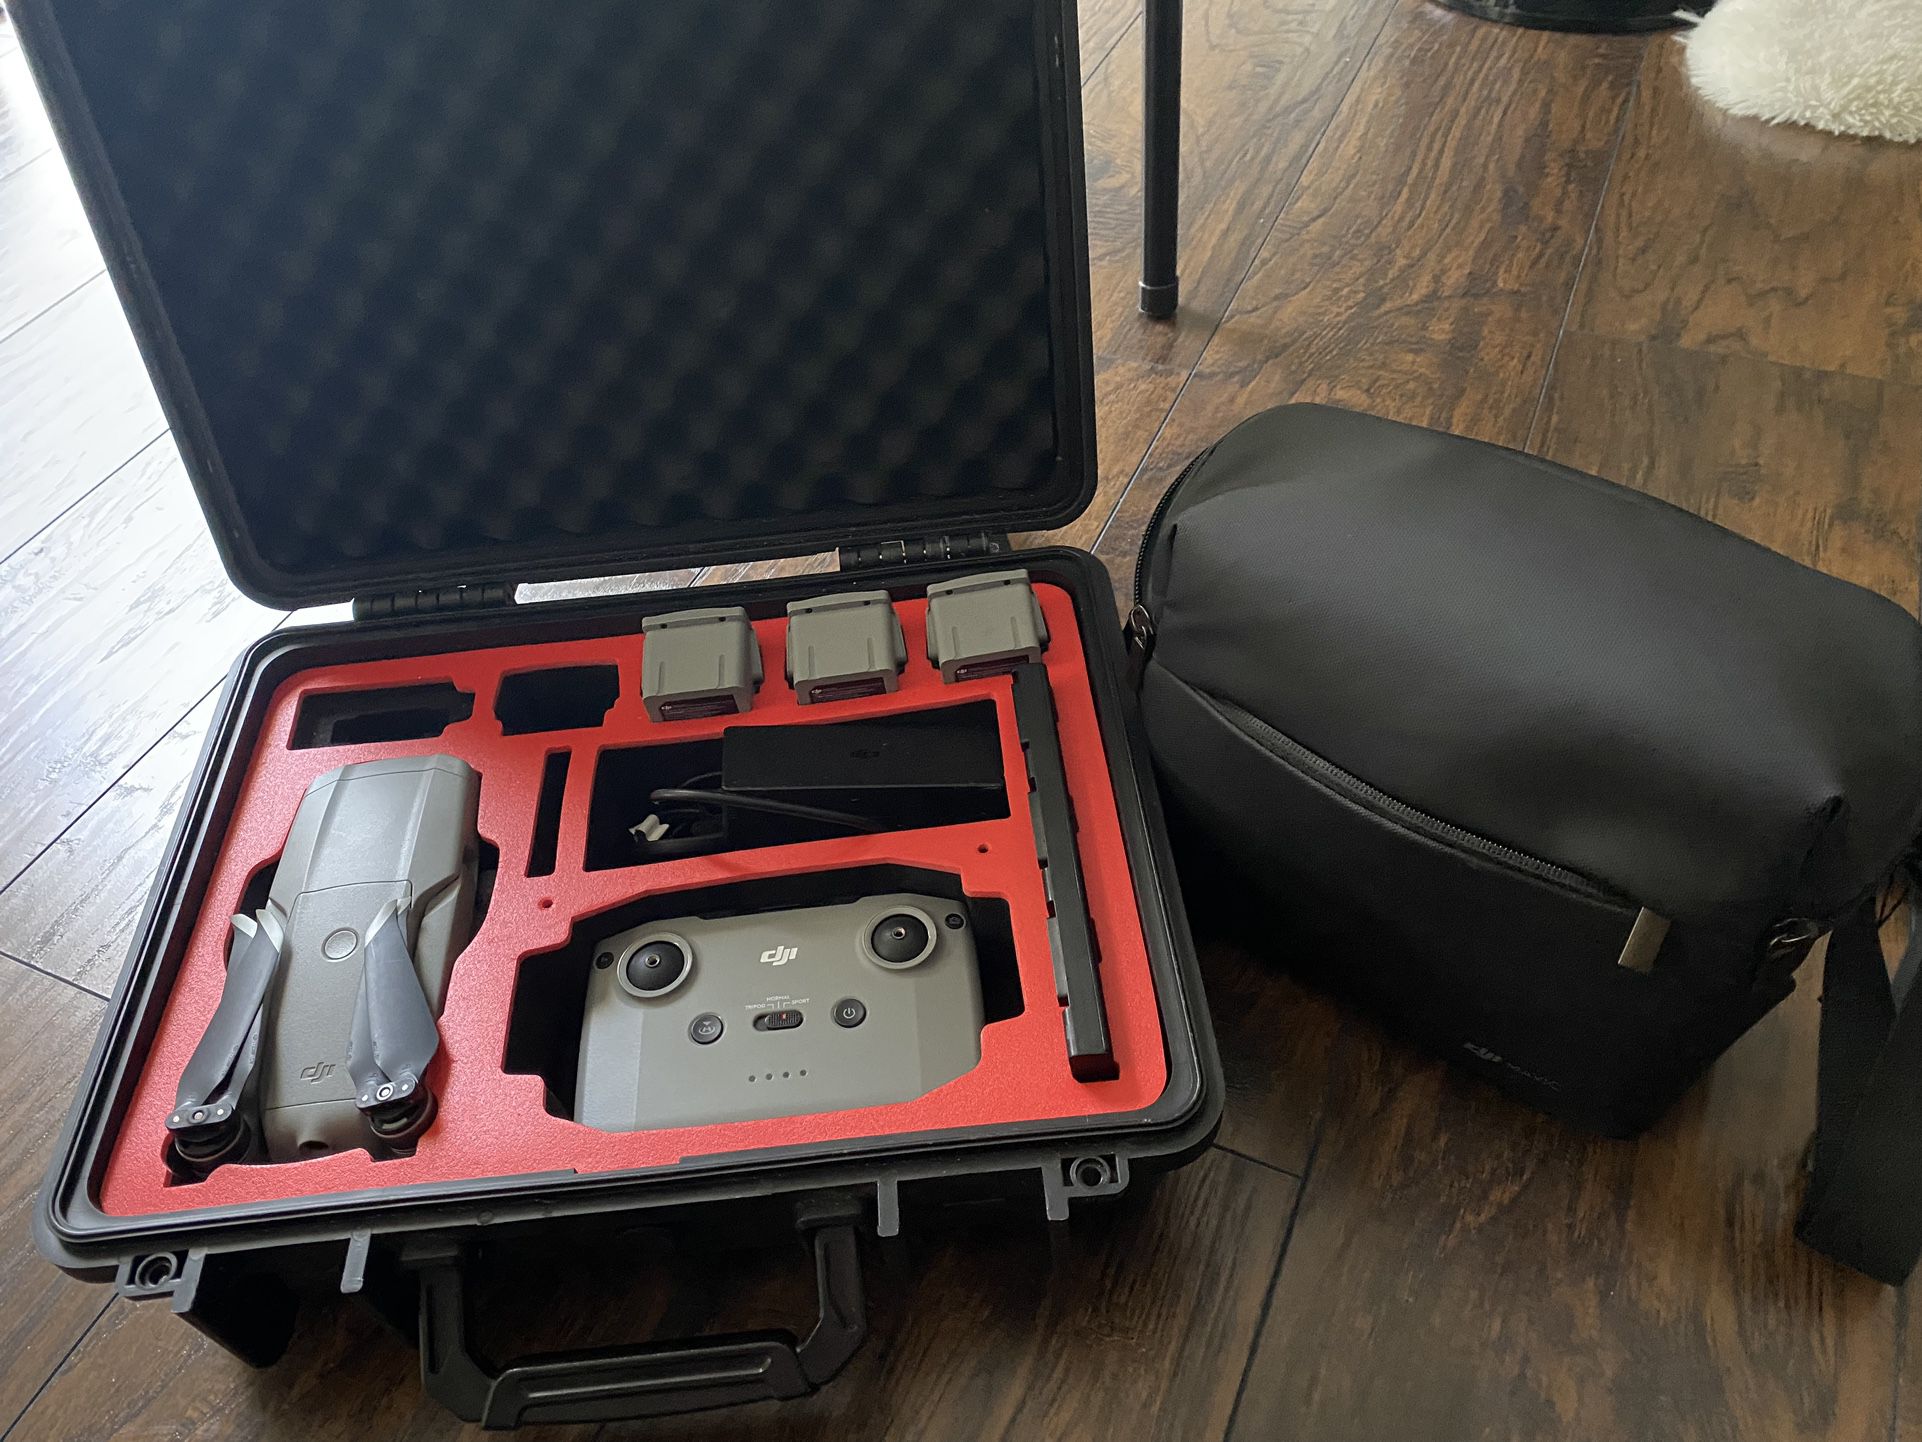 DJI Mavic air 2 With Hard case And 3 Extra Batteries 